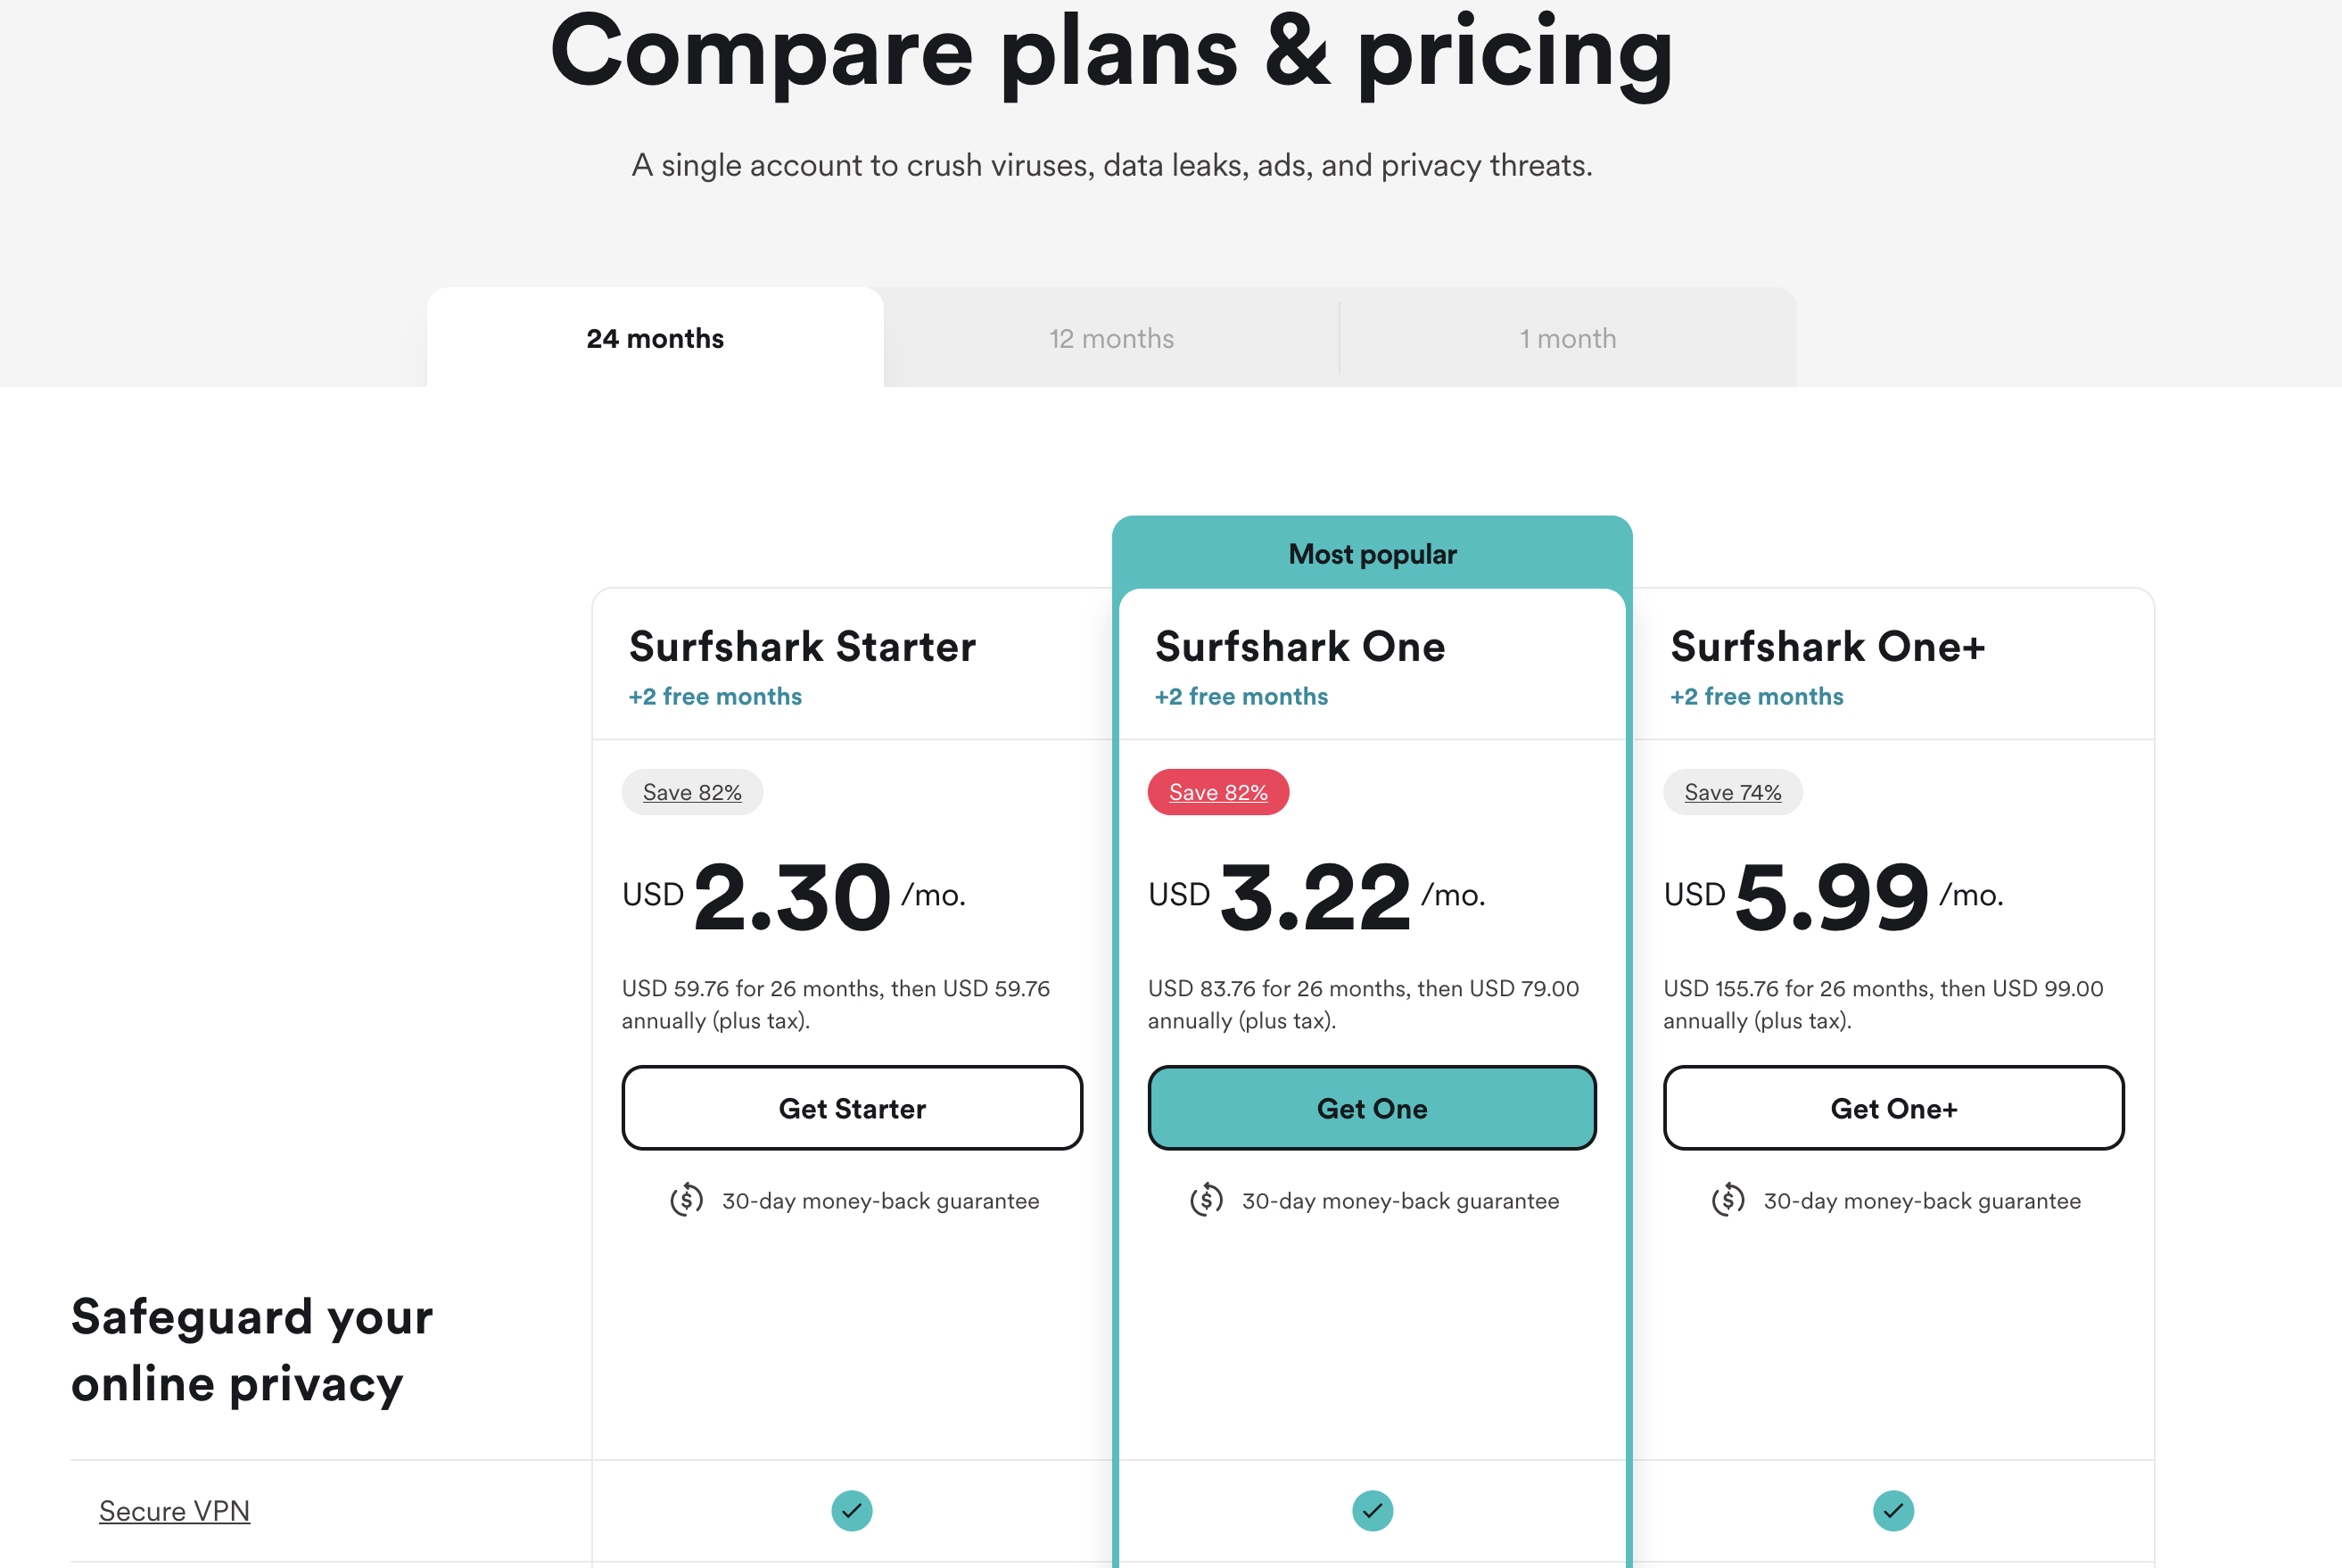 Surfshark One Pricing